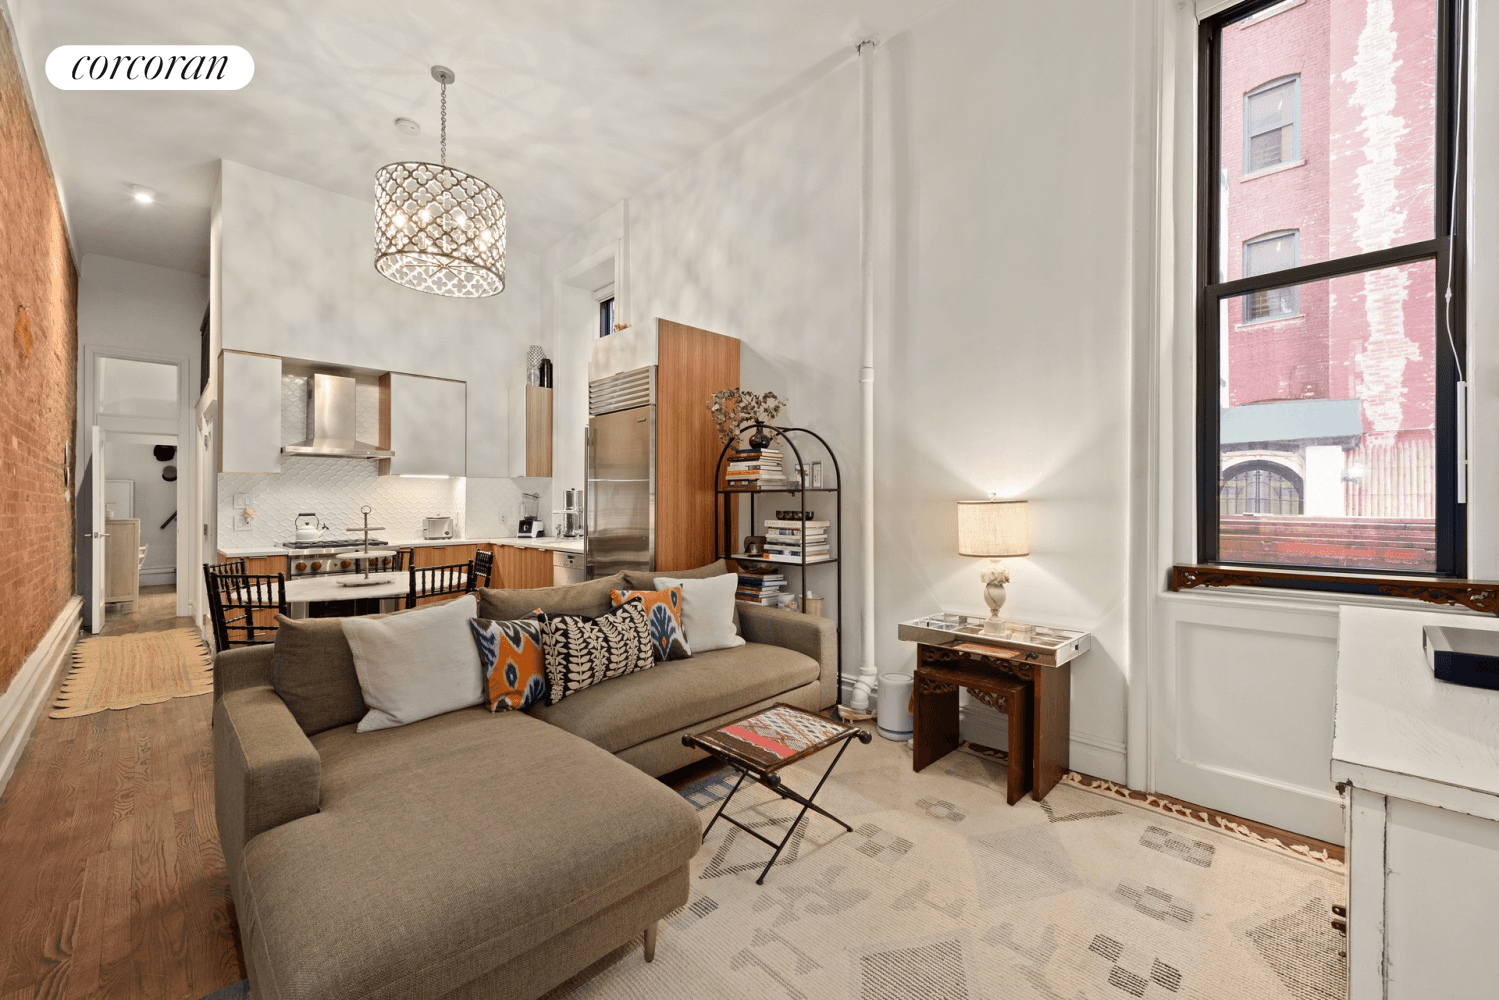 Visit this remarkable Gold Coast loft at 43 Fifth Avenue your dream oasis on NYC's most picturesque Greenwich Village block at 11th Street across from 1st Presbyterian Church !